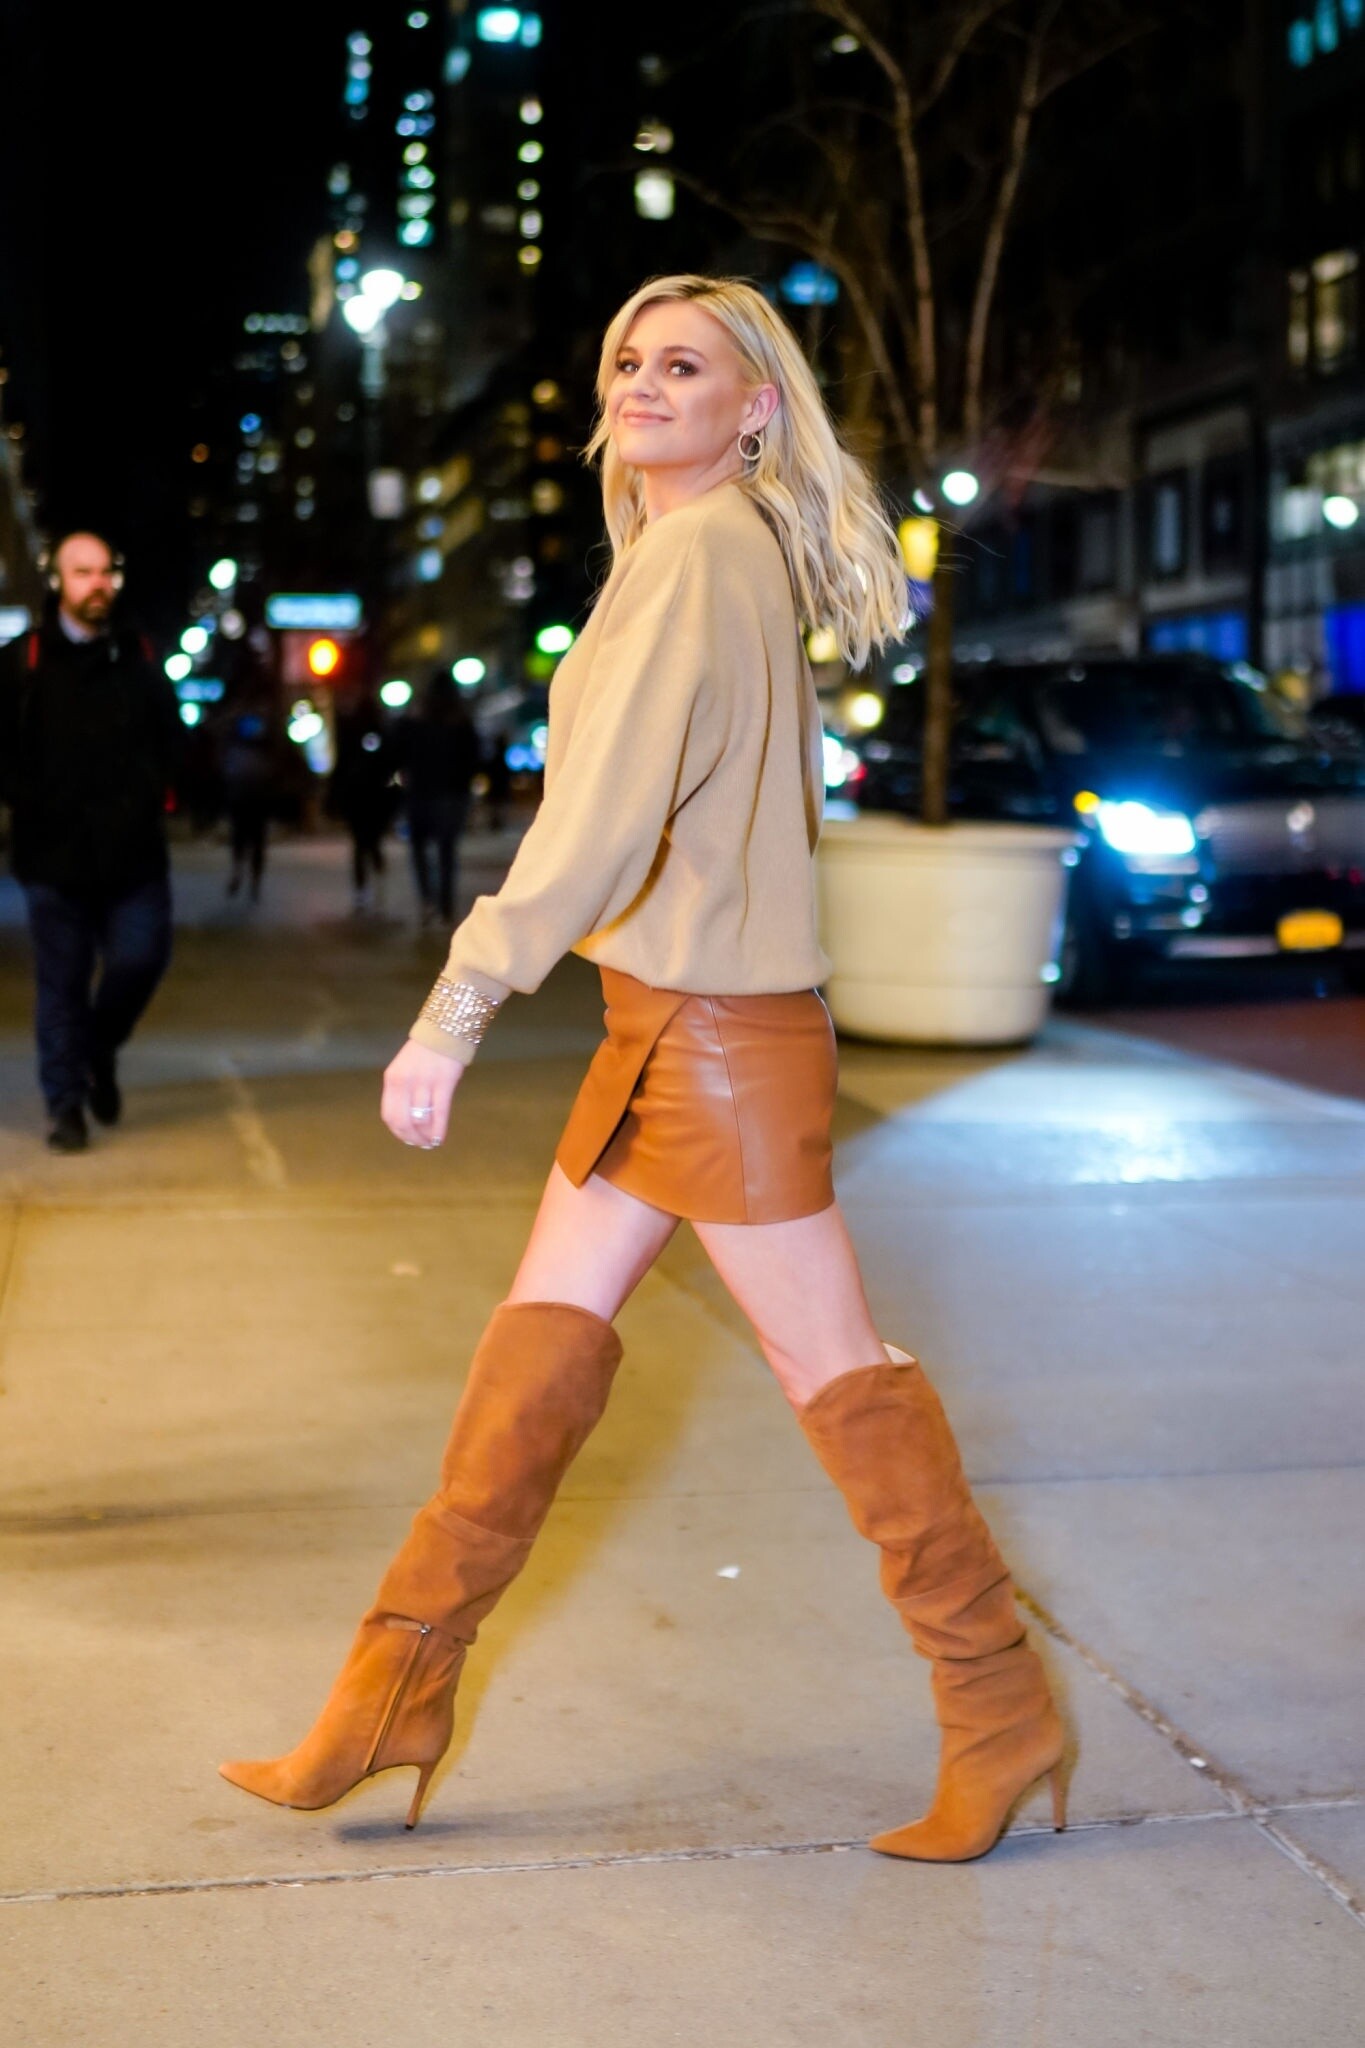 Kelsea Ballerini out in NYC